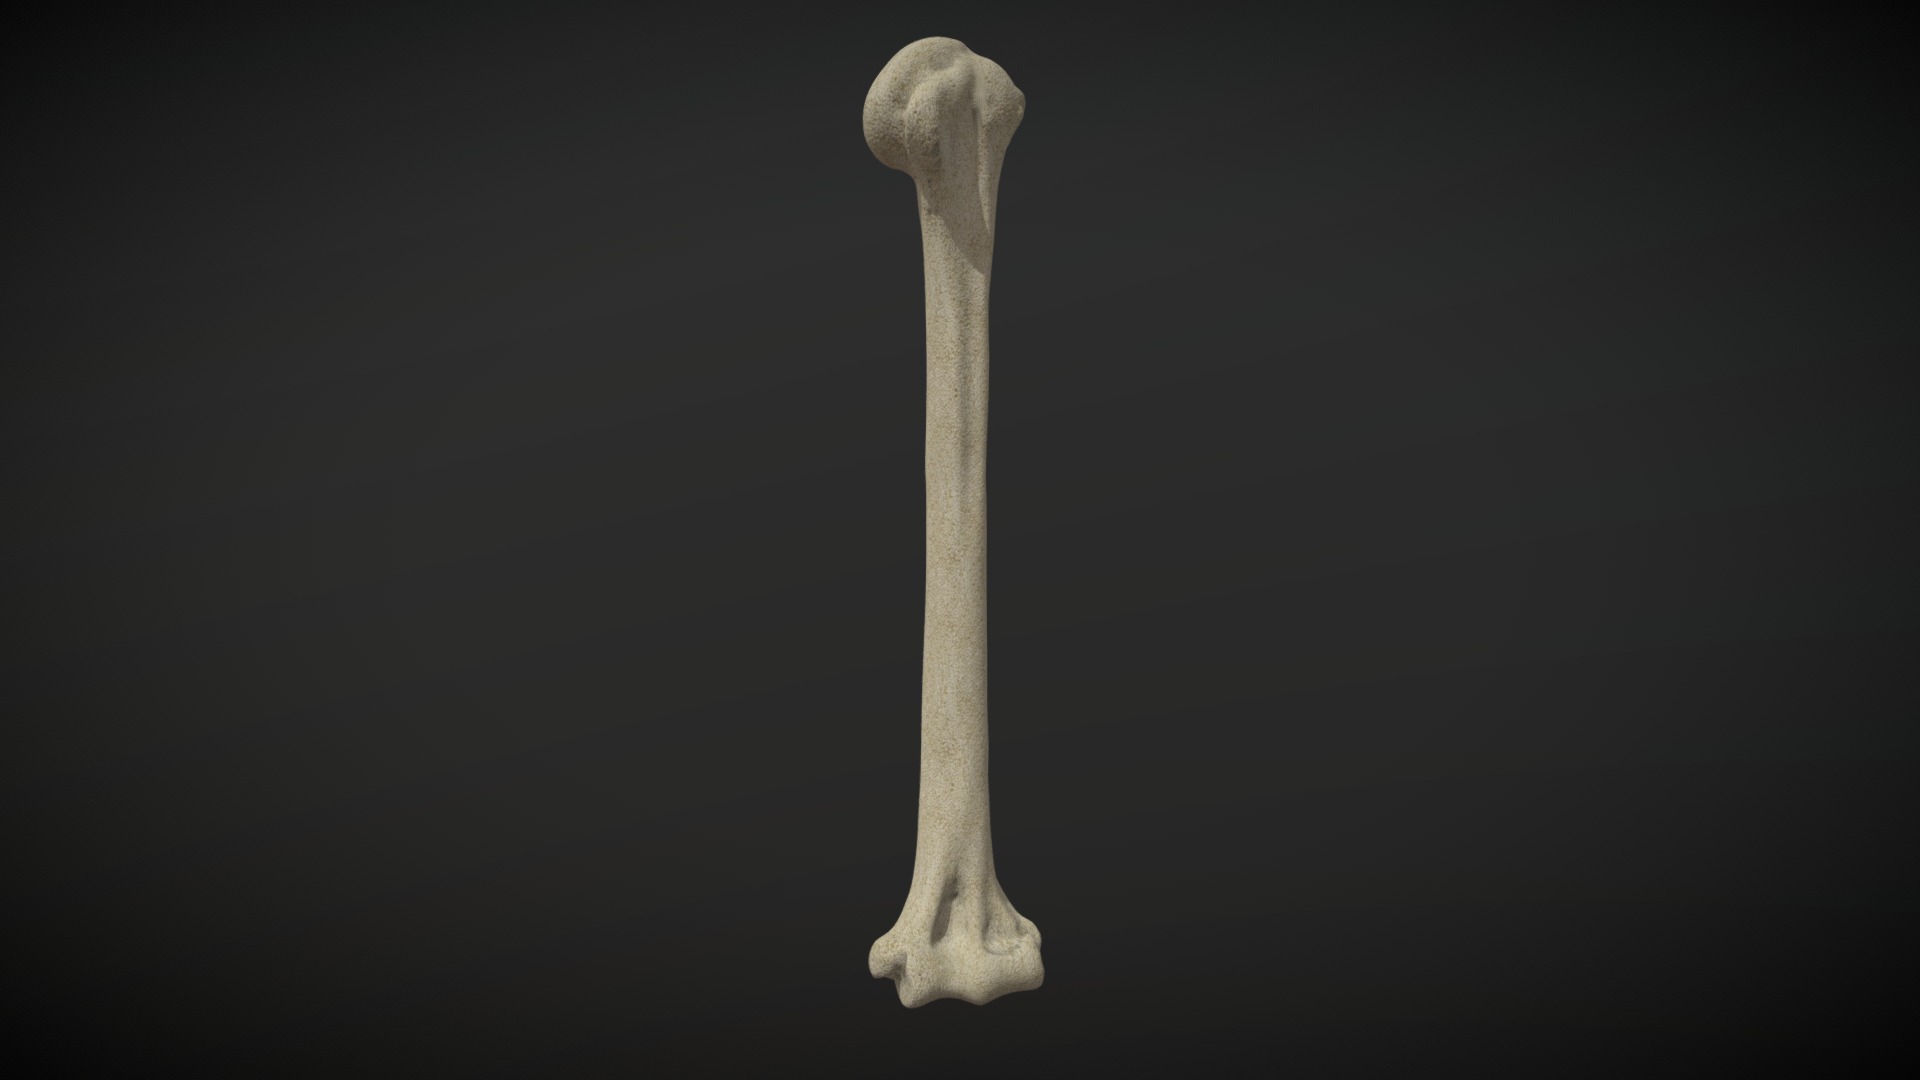 3D model Humerus/Humero - This is a 3D model of the Humerus/Humero. The 3D model is about a bone on a black background.